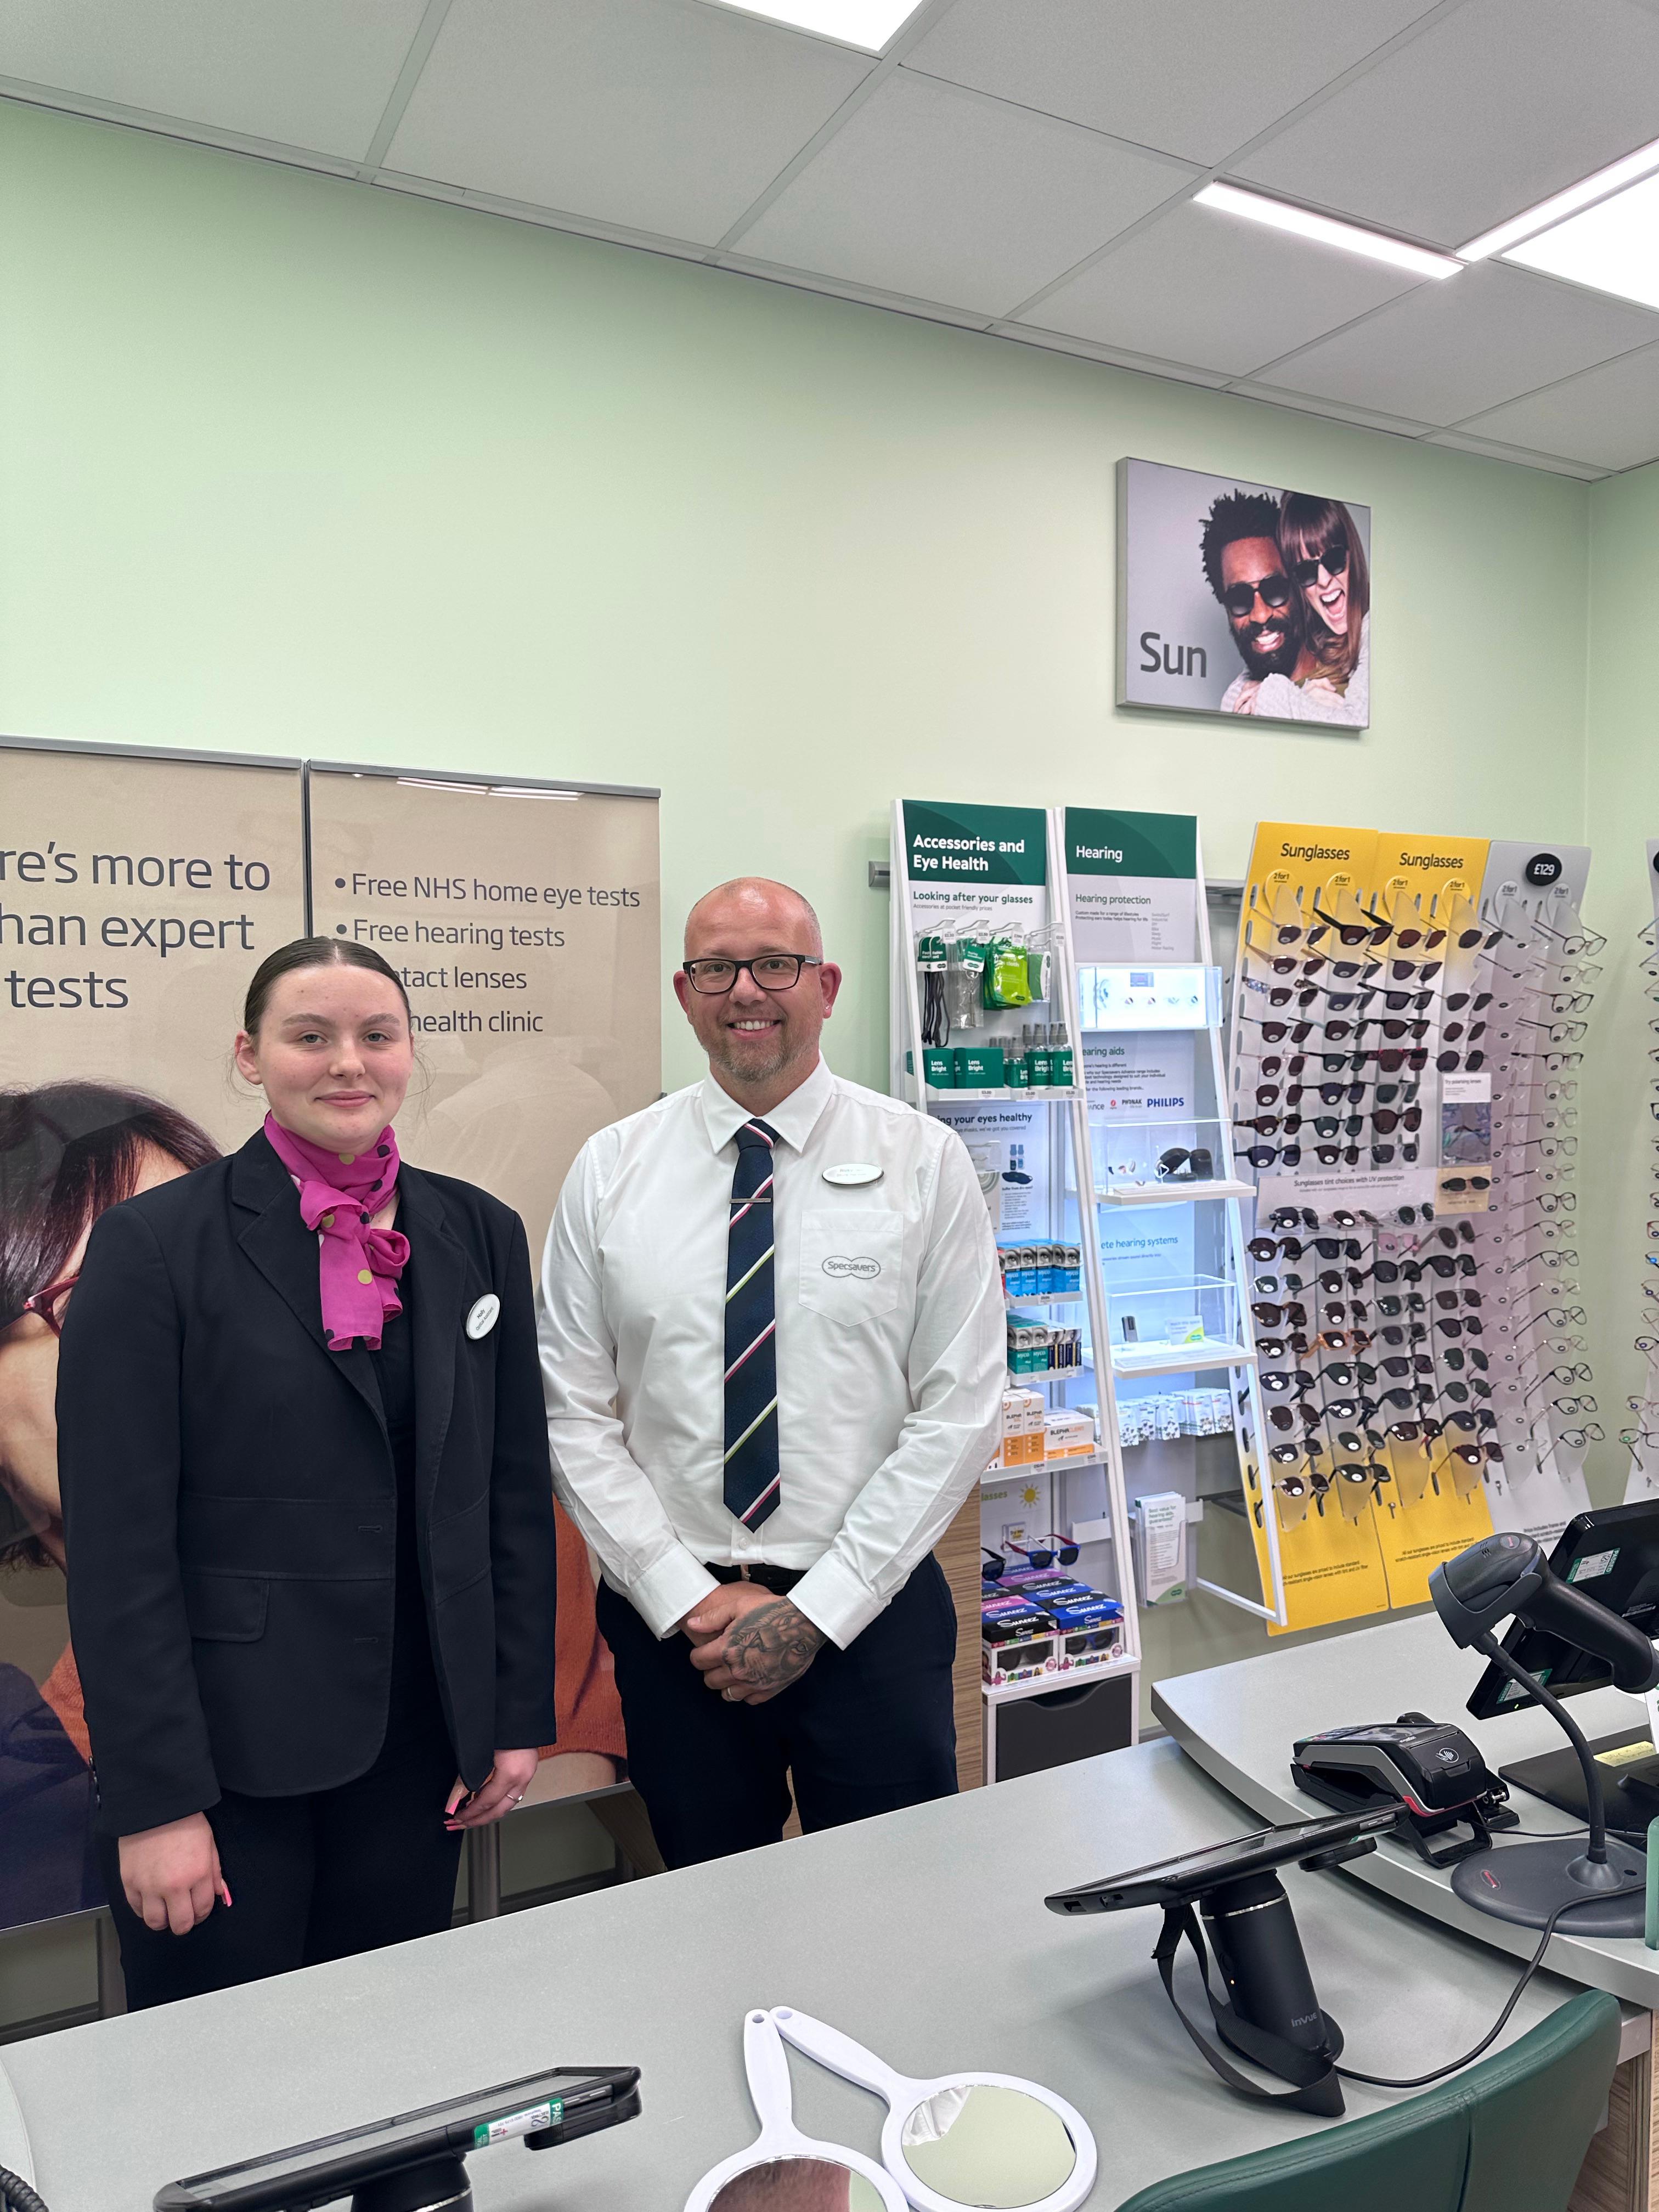 Specsavers Opticians and Audiologists - Archer Road Specsavers Opticians and Audiologists - Archer Road Sheffield 01142 367143